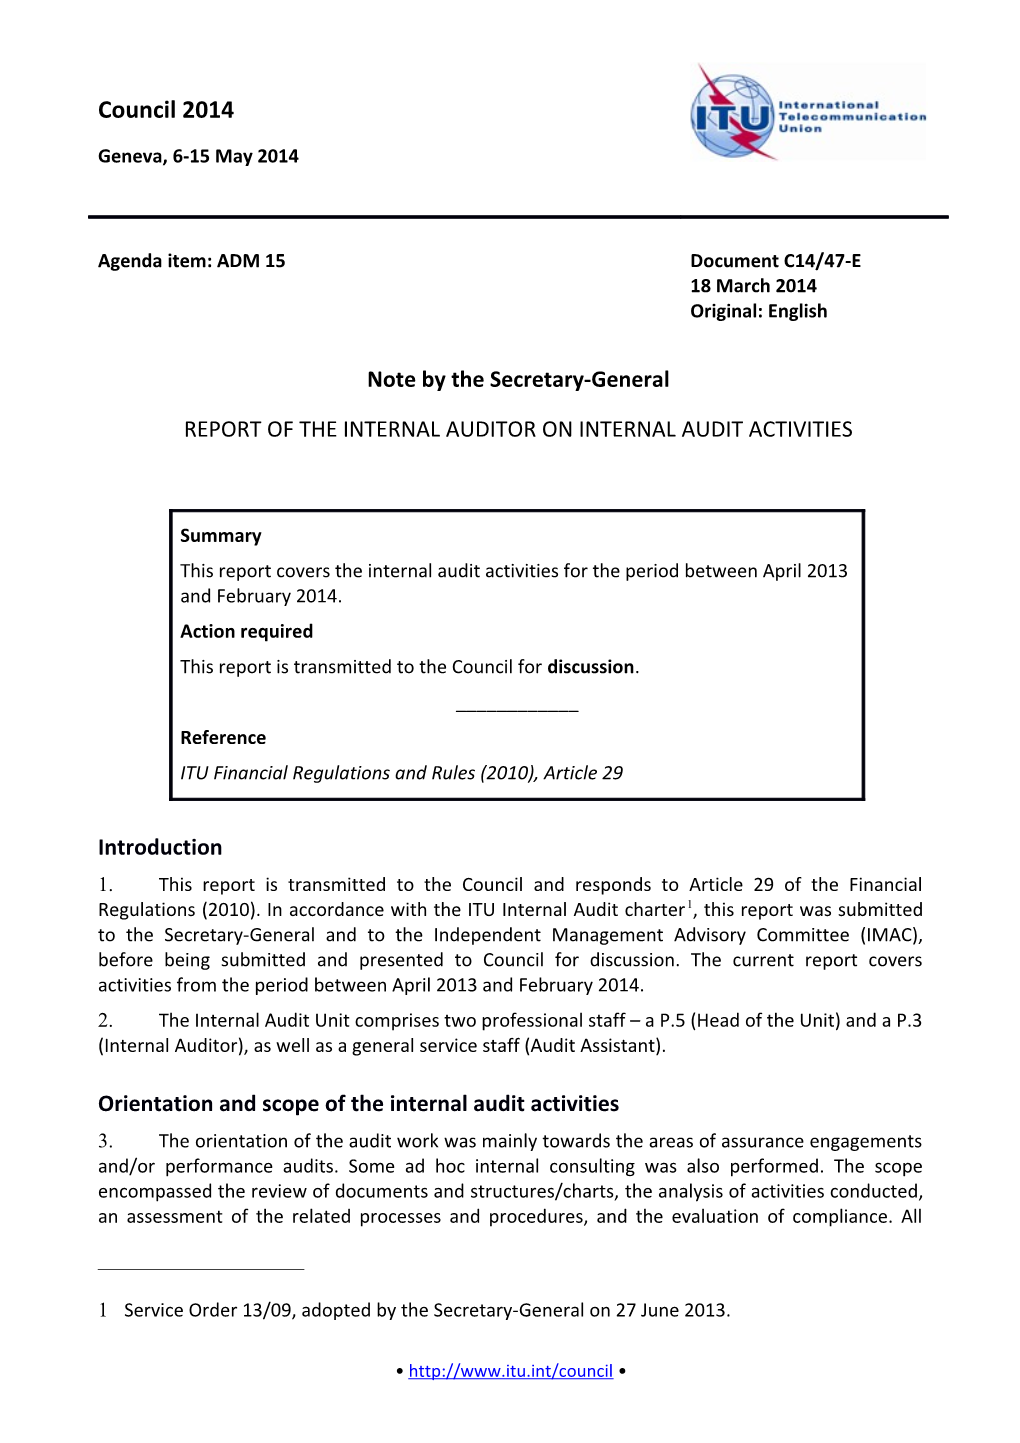 C13/INF/4 - Report of the Internal Auditor on Internal Audit Activities